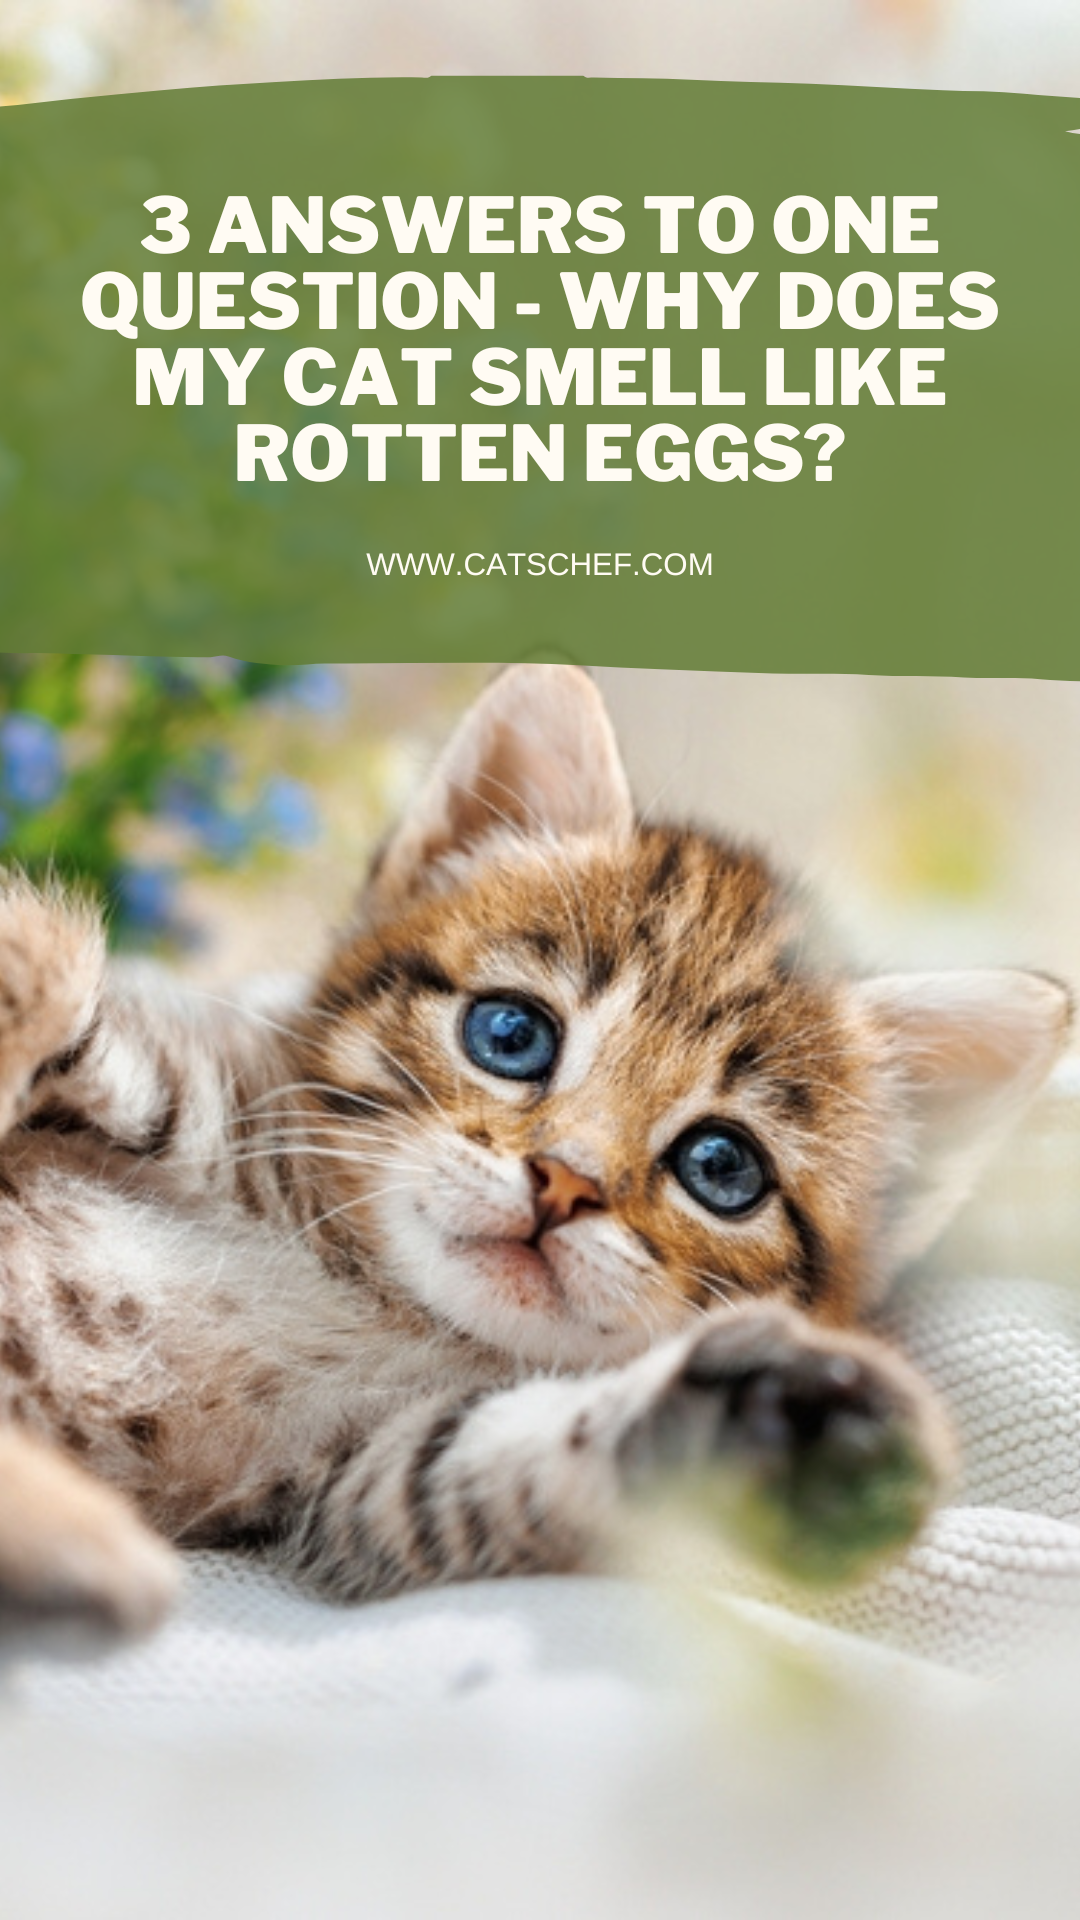 3 Answers To One Question - Why Does My Cat Smell Like Rotten Eggs?